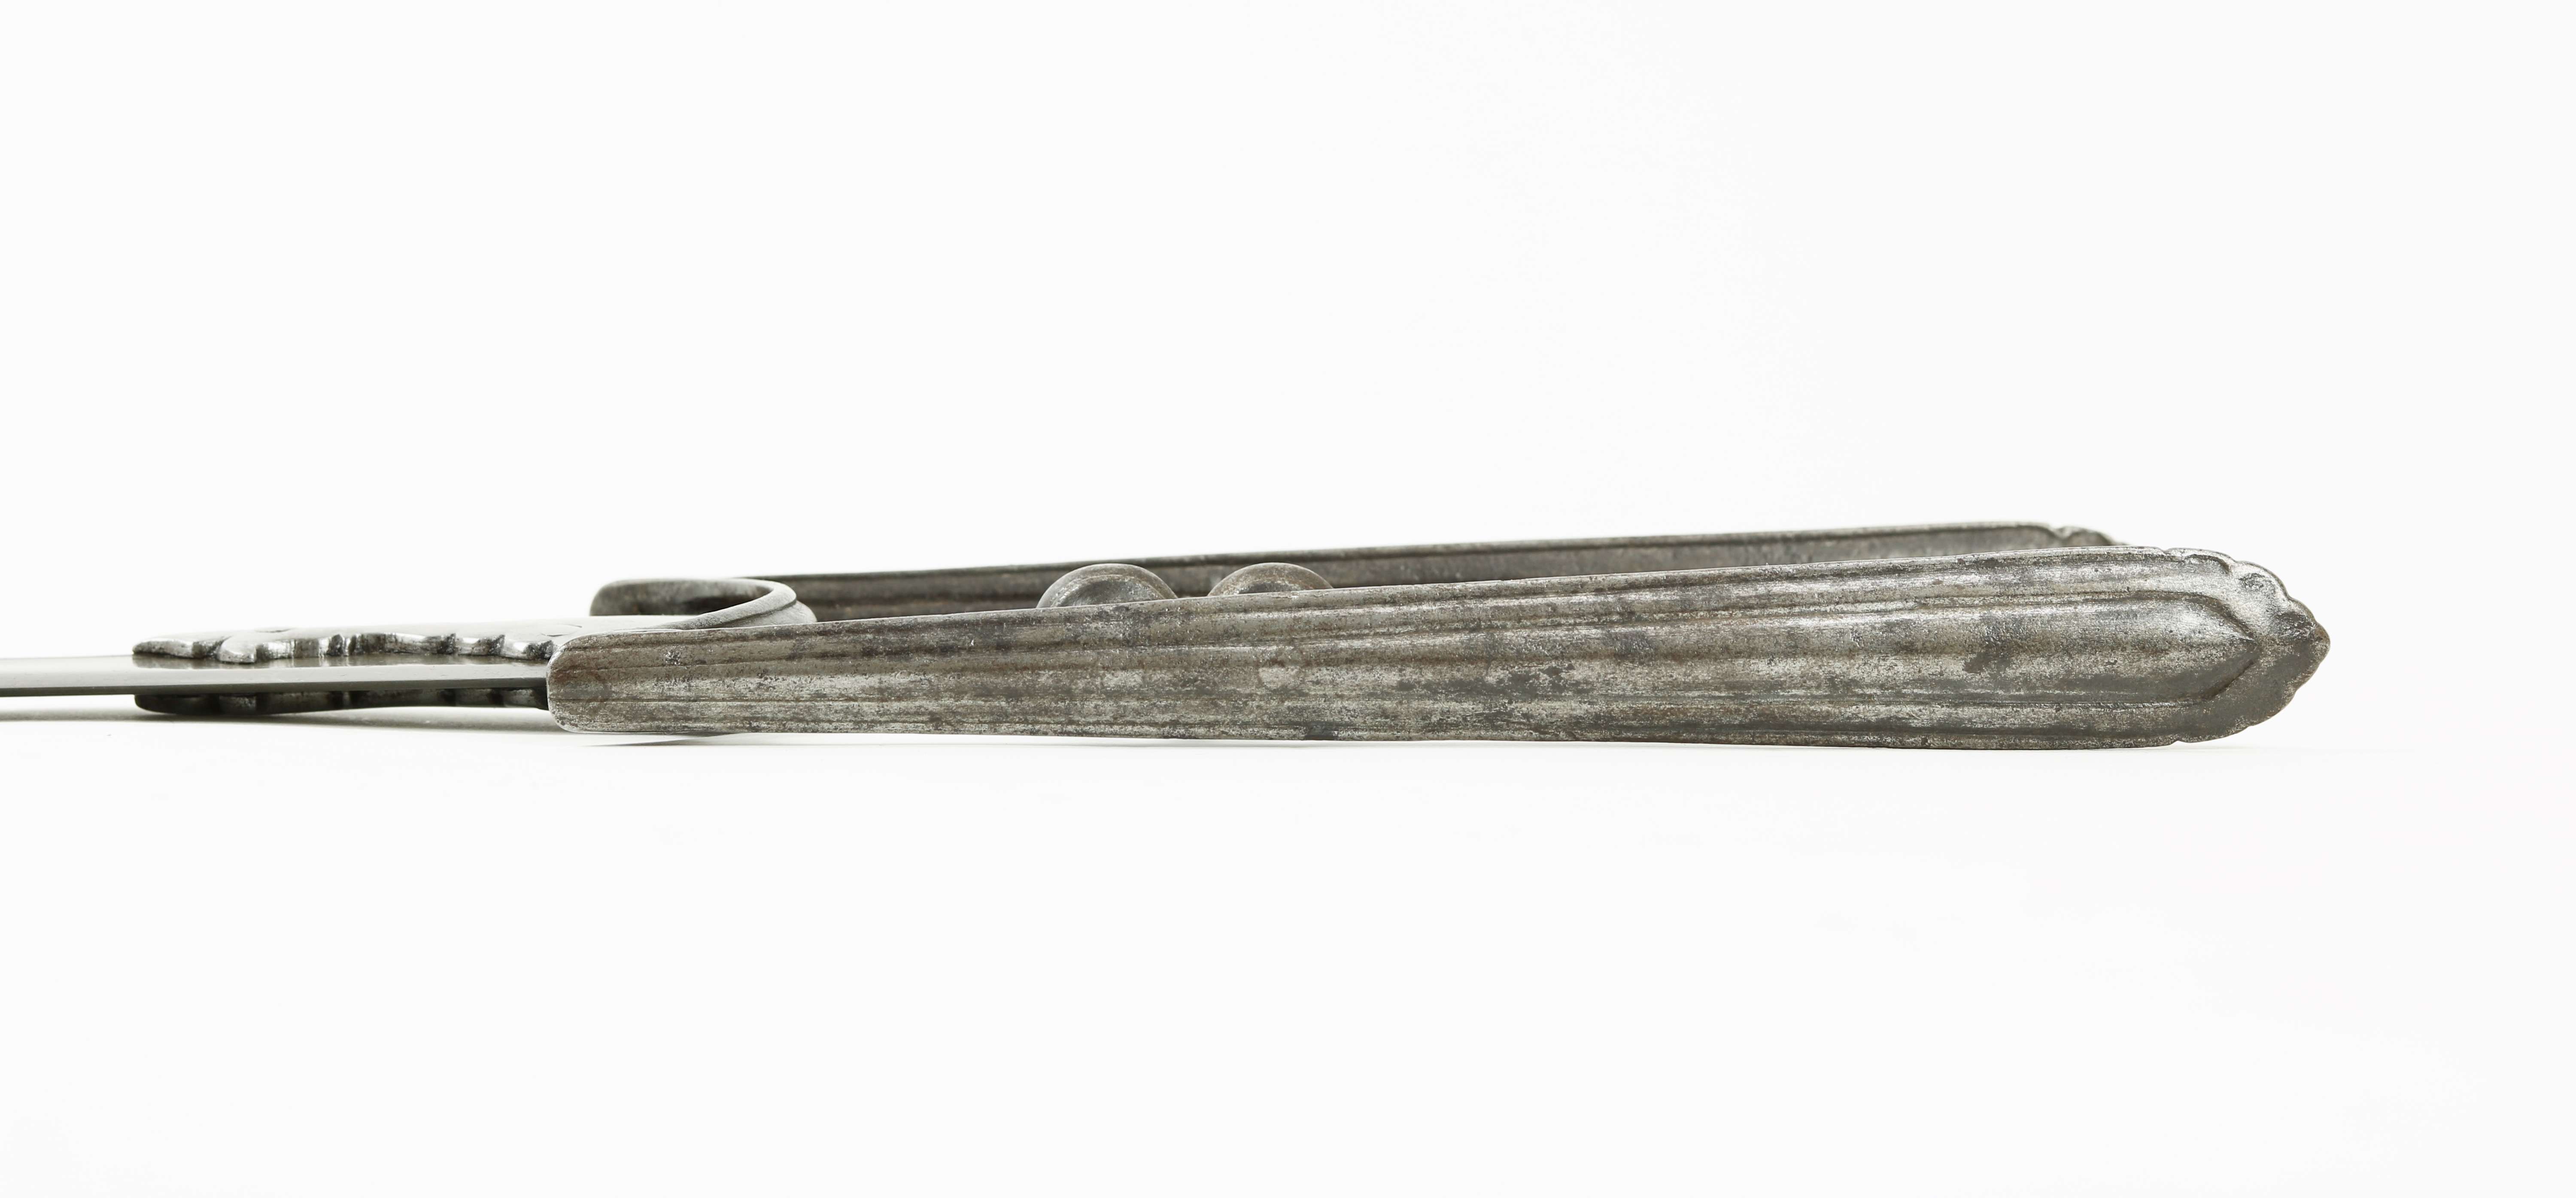 17th century South Indian katar with curved blade